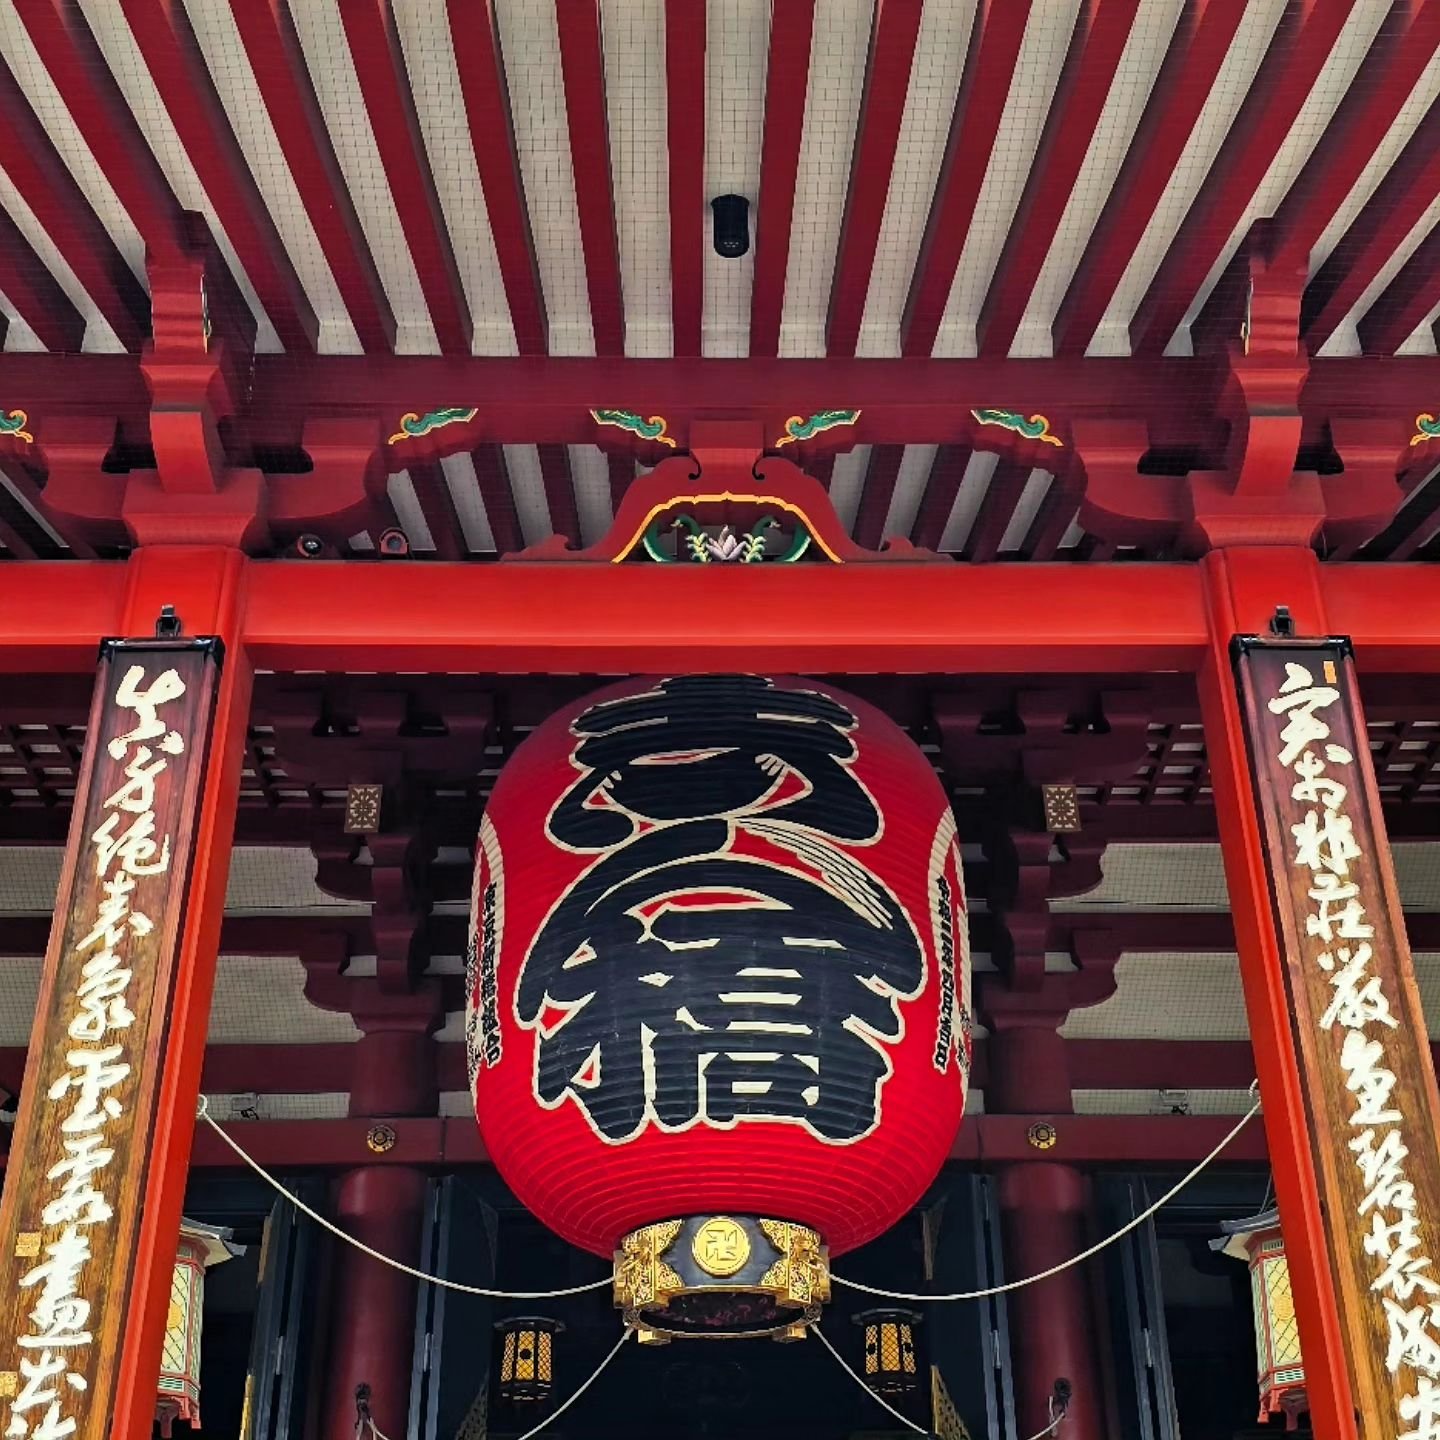 Loved exploring the old town district of Asakusa in Tokyo, whilst trying very hard not to get overwhelmed by the masses of crowds 😅➡️

If you're planning a trip to Japan, check out my blog post on everything you need to know before you visit! ✌️🇯🇵